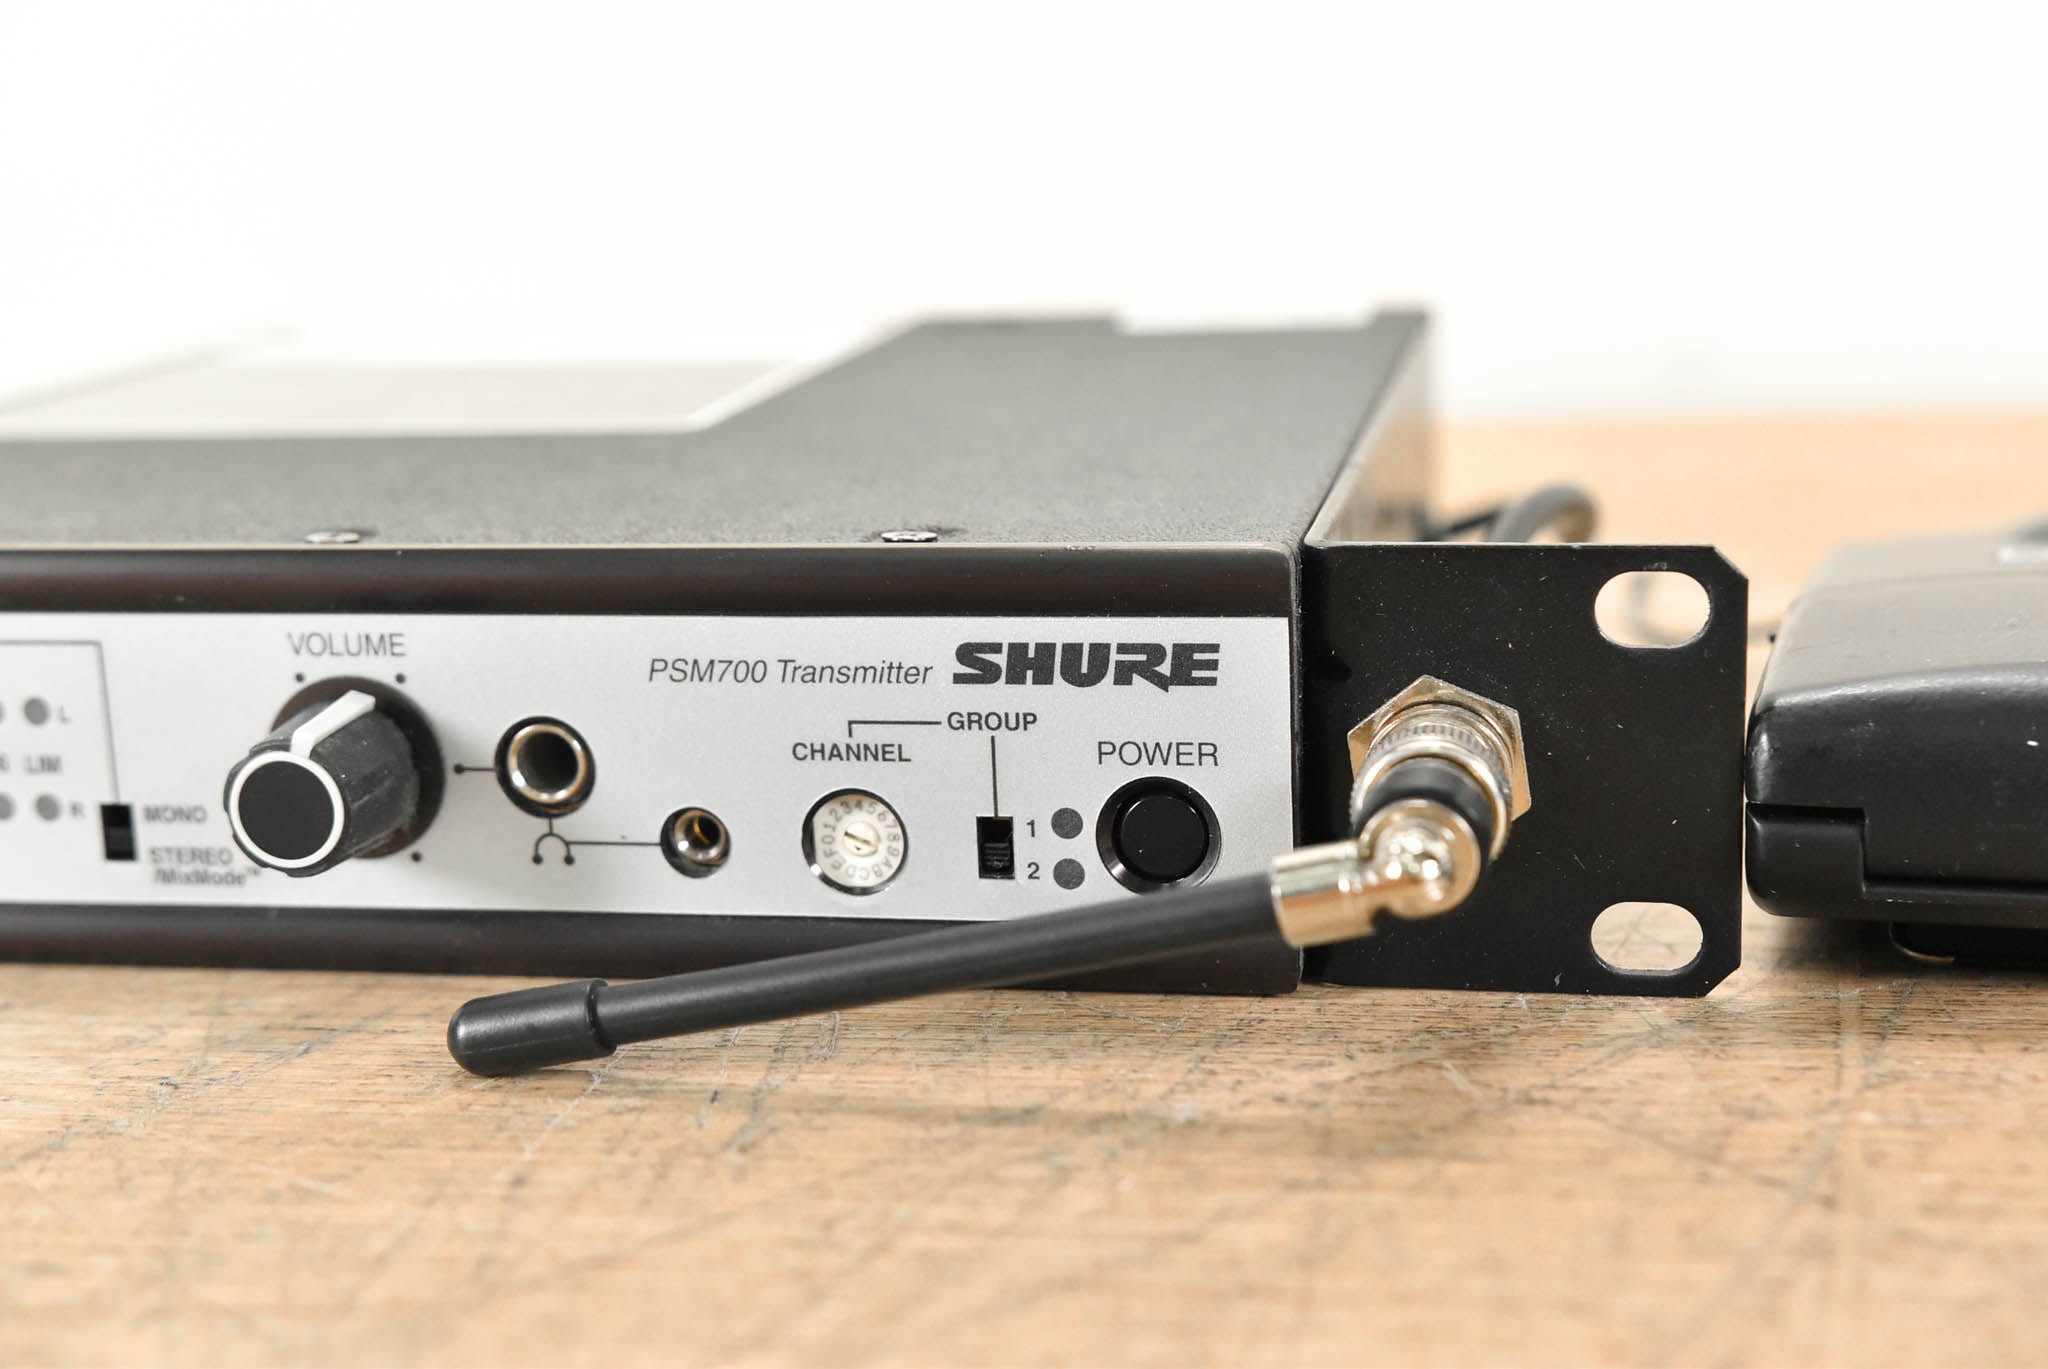 Shure PSM 700 Wireless In-Ear Monitoring System - HF Band: 722-746 MHz